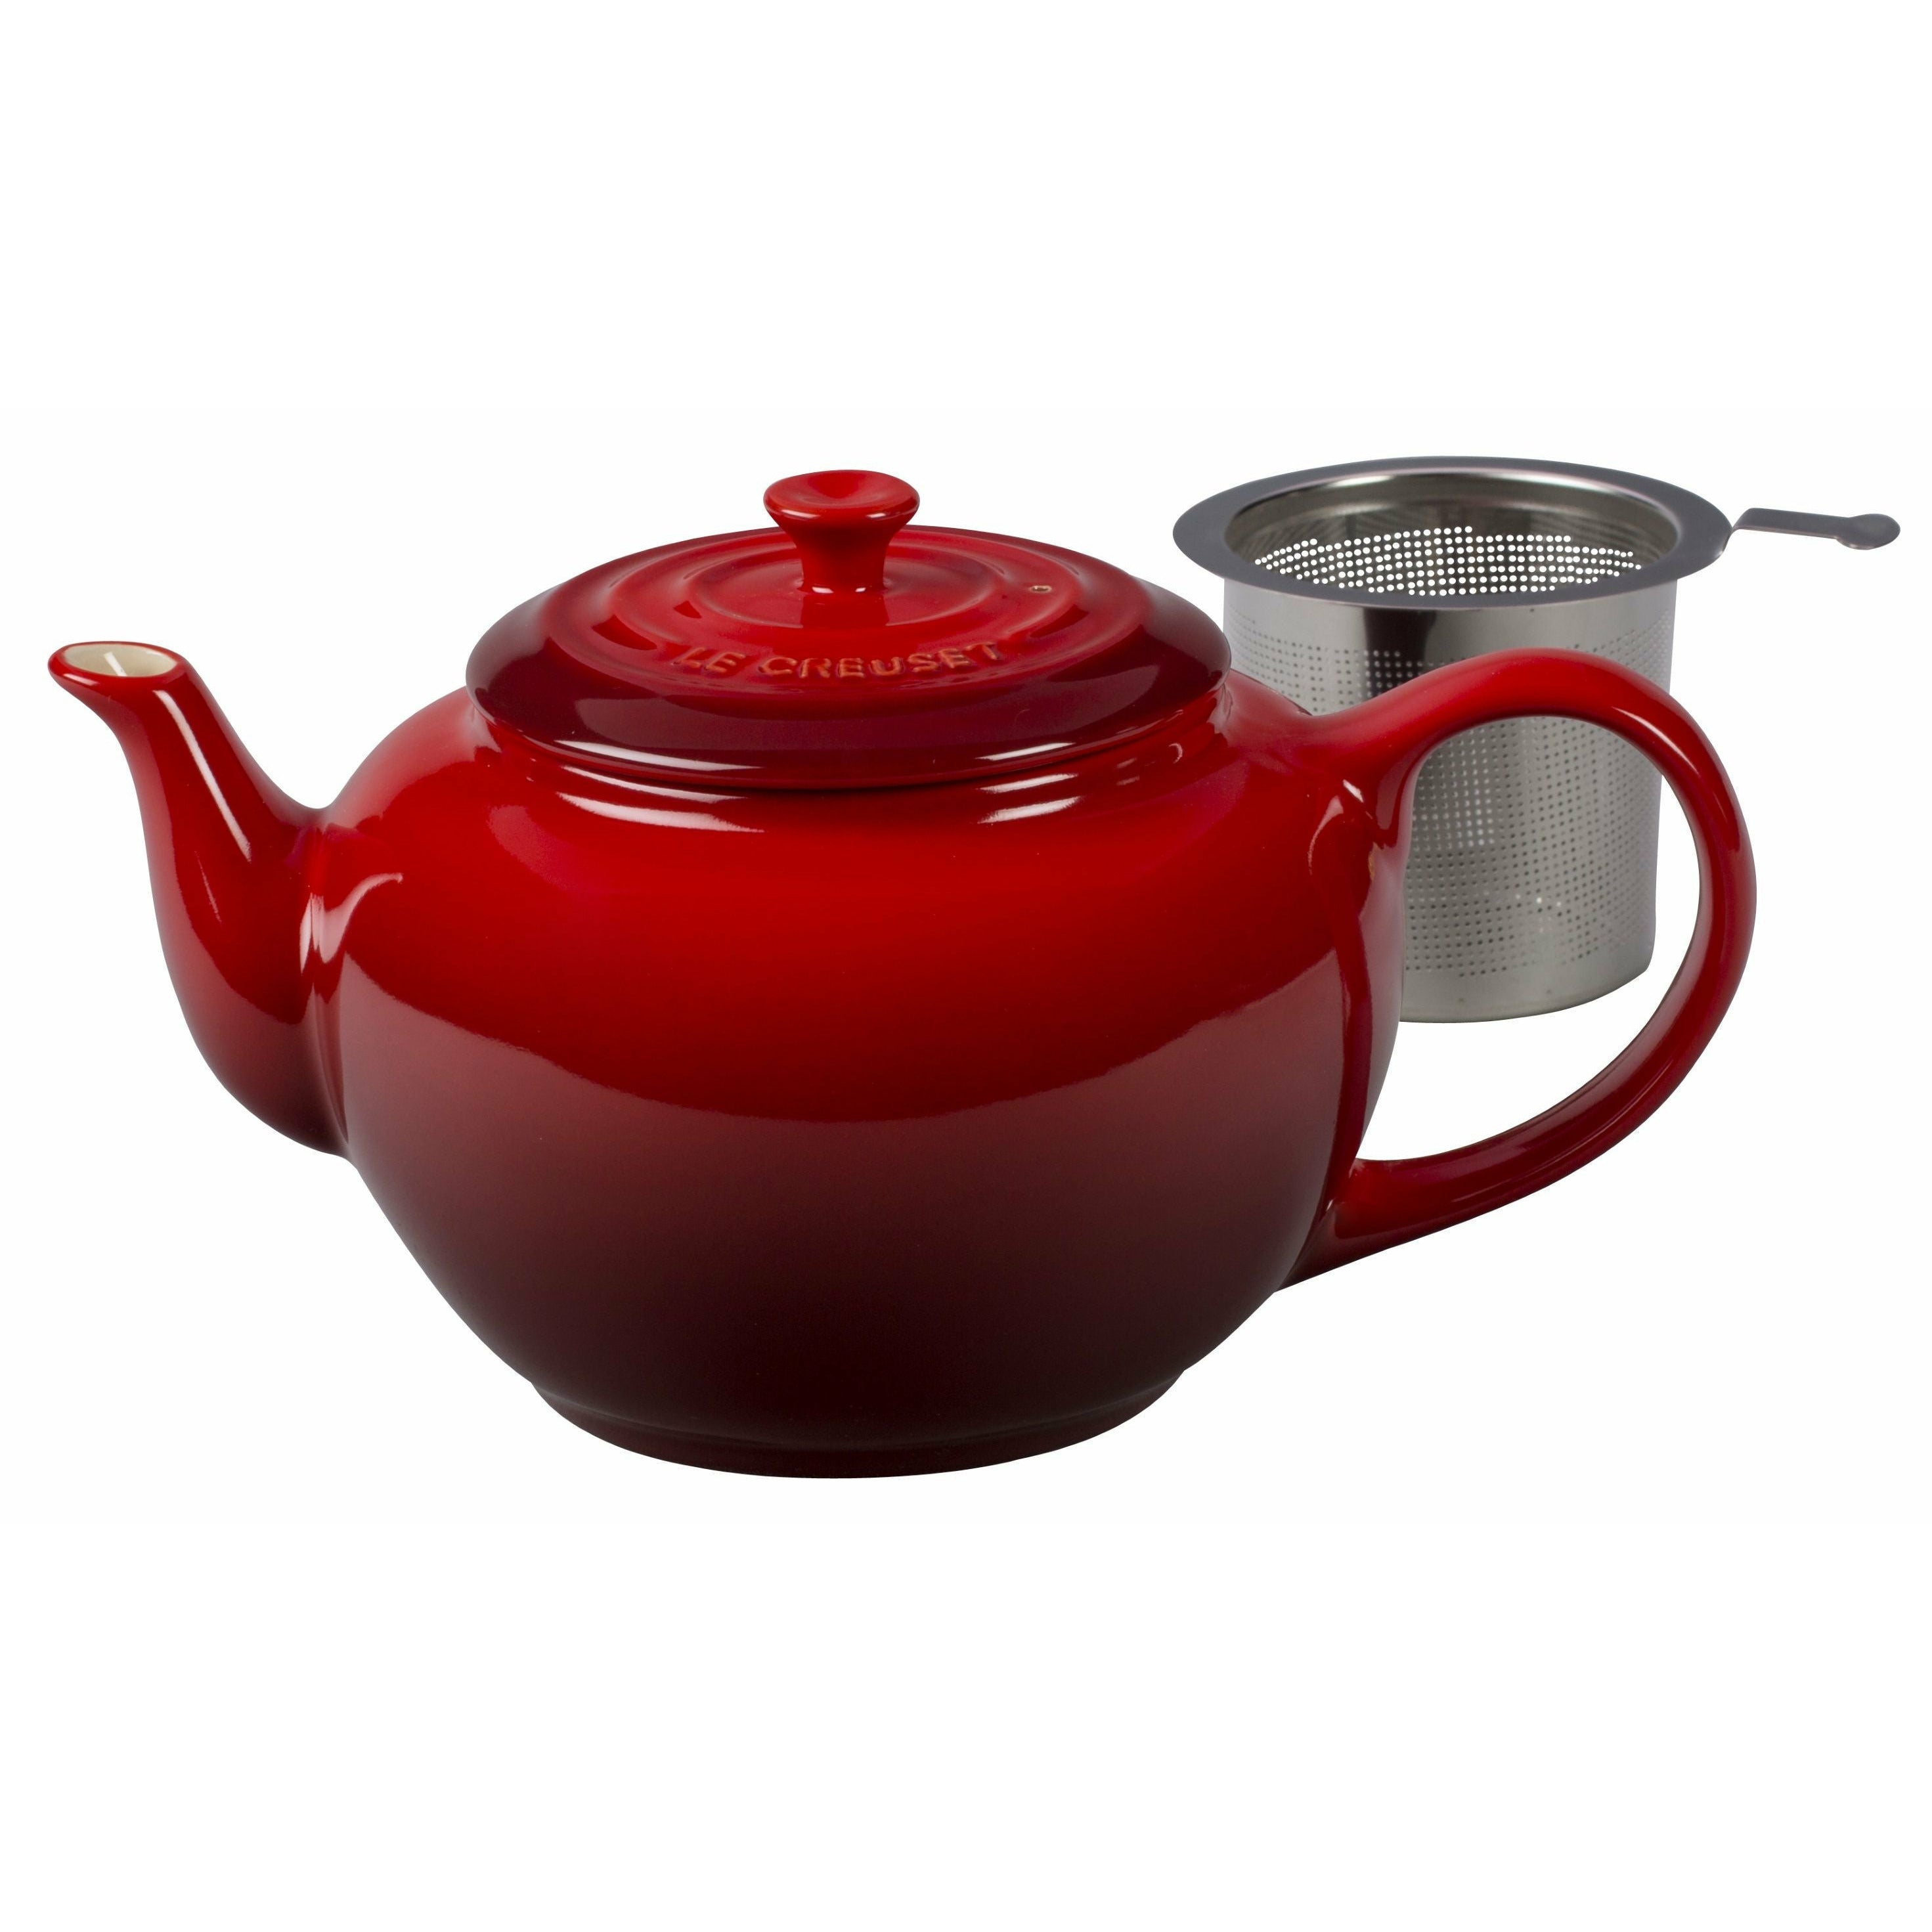 Le Creuset Jug Classic With Sieve 1.3 L, Cherry Red